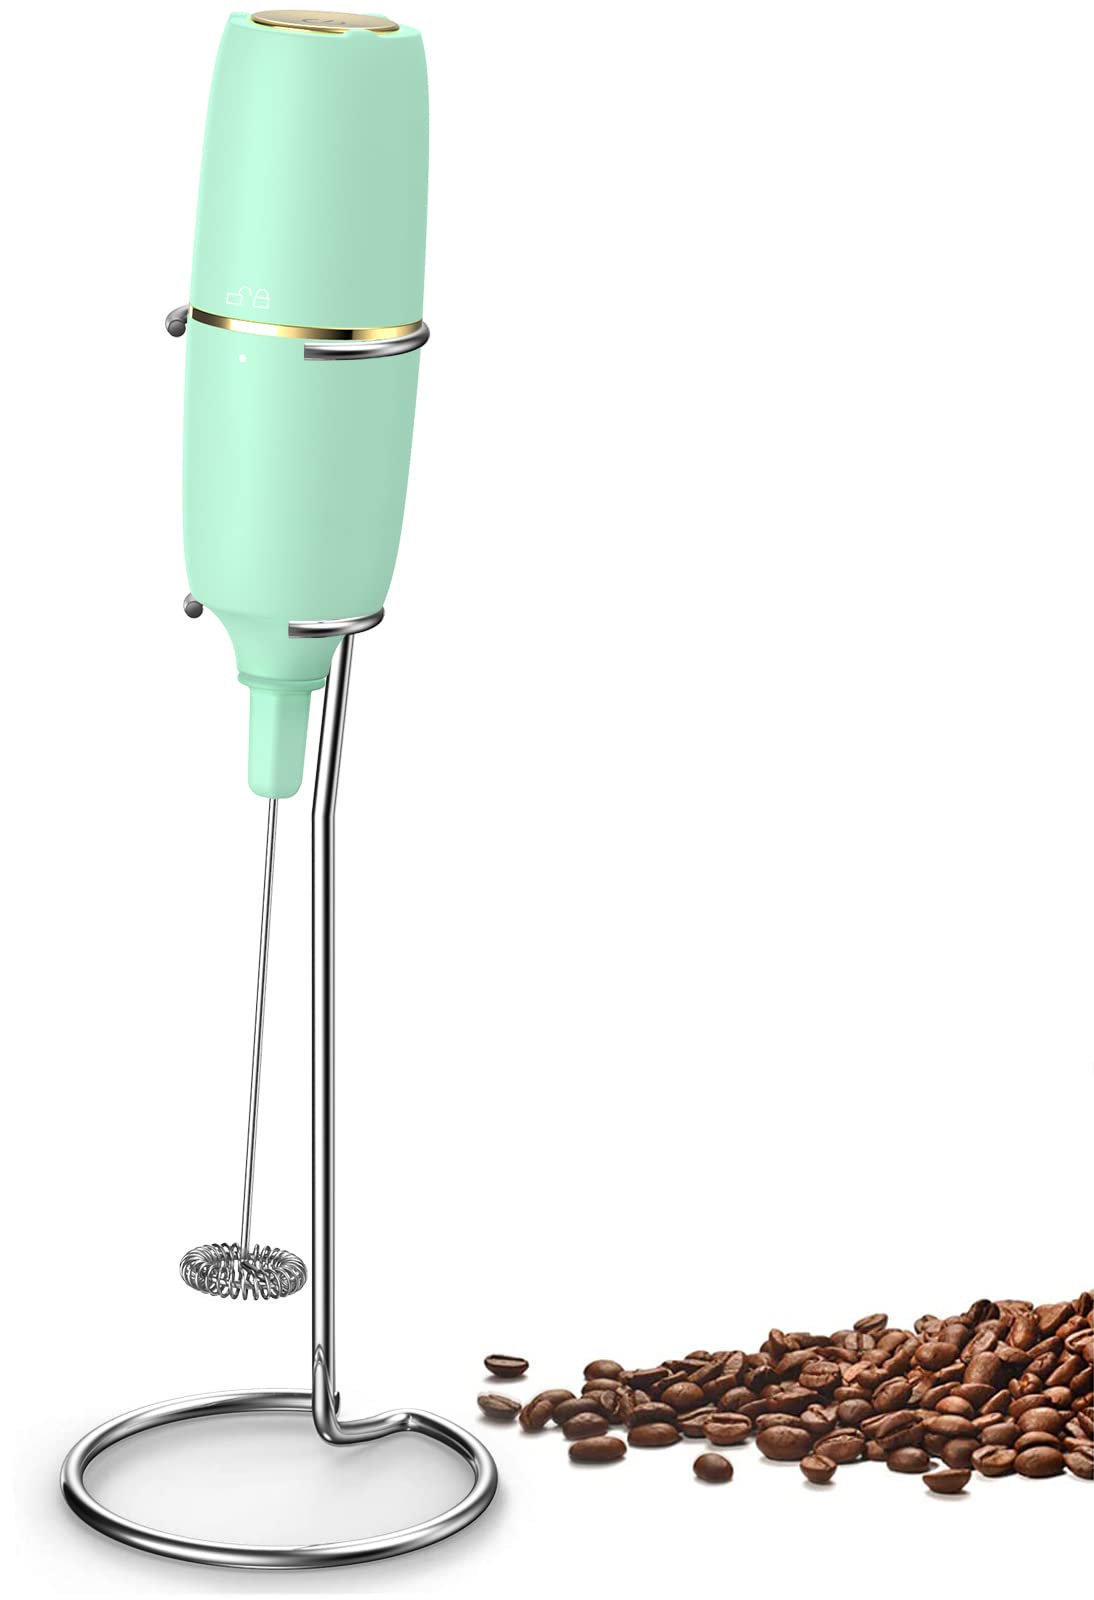  Coffee Frother with Stainless Steel Stand. Enjoy perfectly frothed lattes, cappuccinos, matcha, and hot chocolate mint at home or on the go! (Model: MA002, Medium)